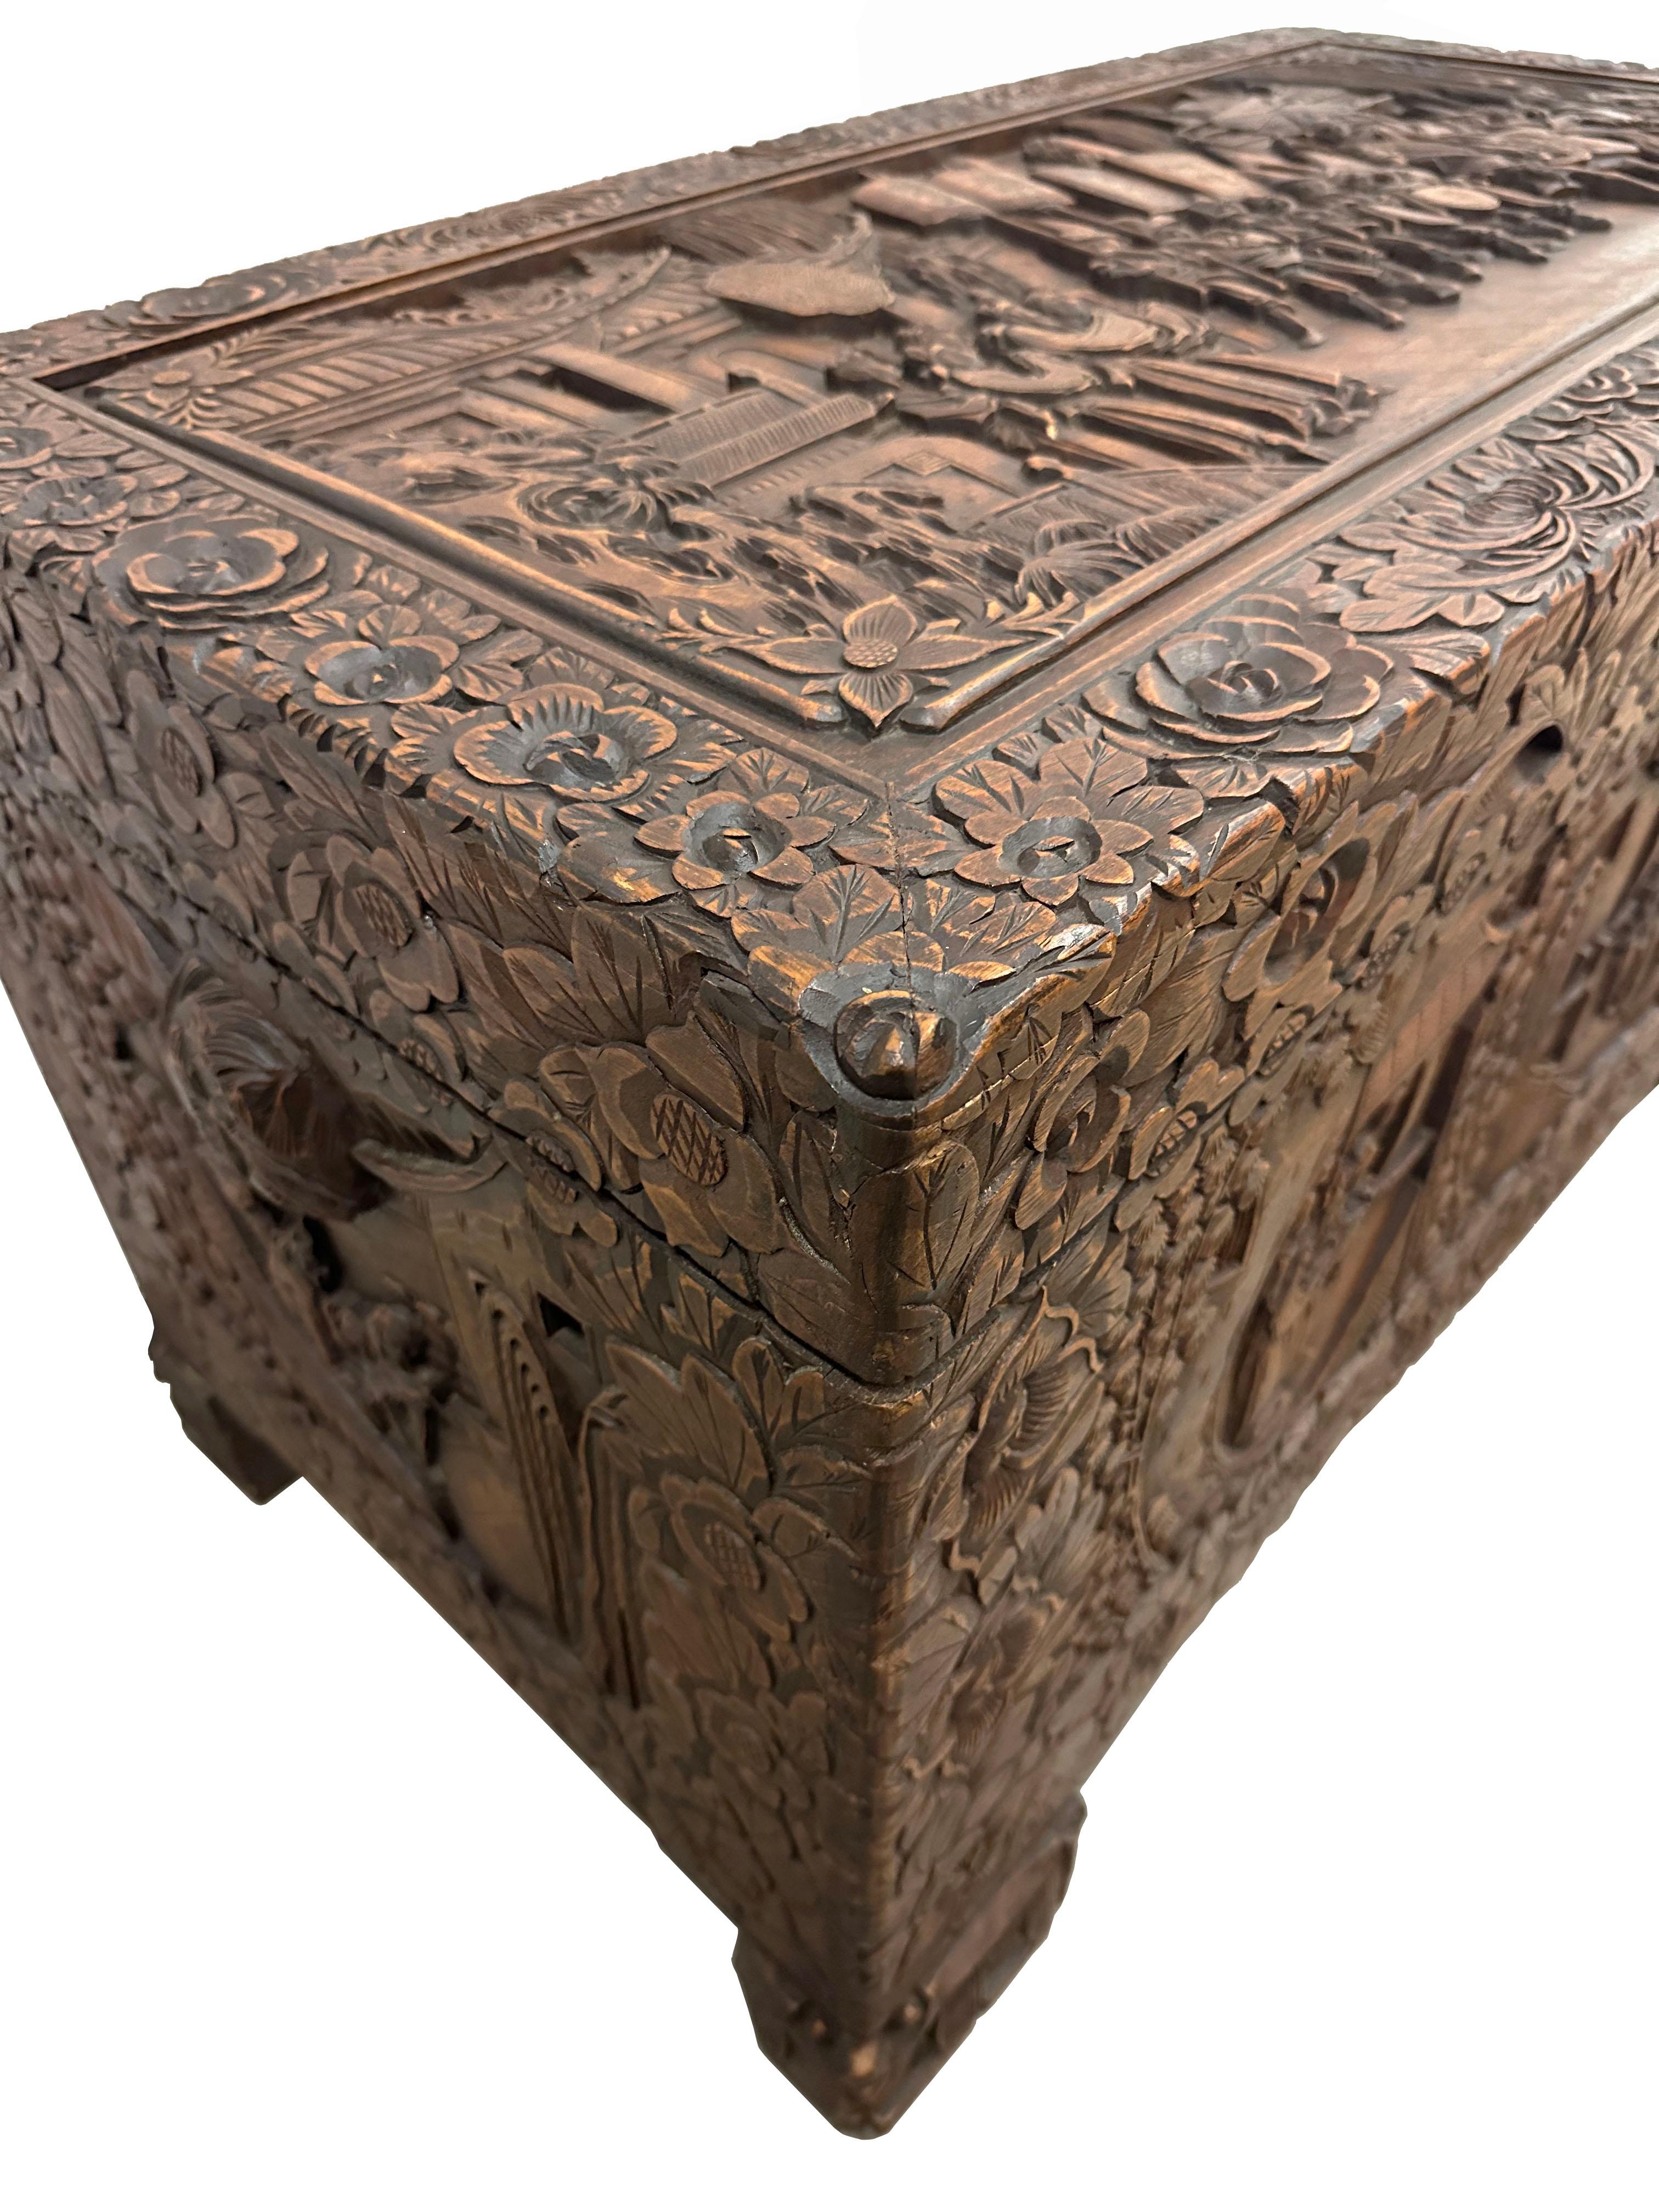 Early 20th Century Chinese Carved Camphor Wood Hope Chest For Sale 3